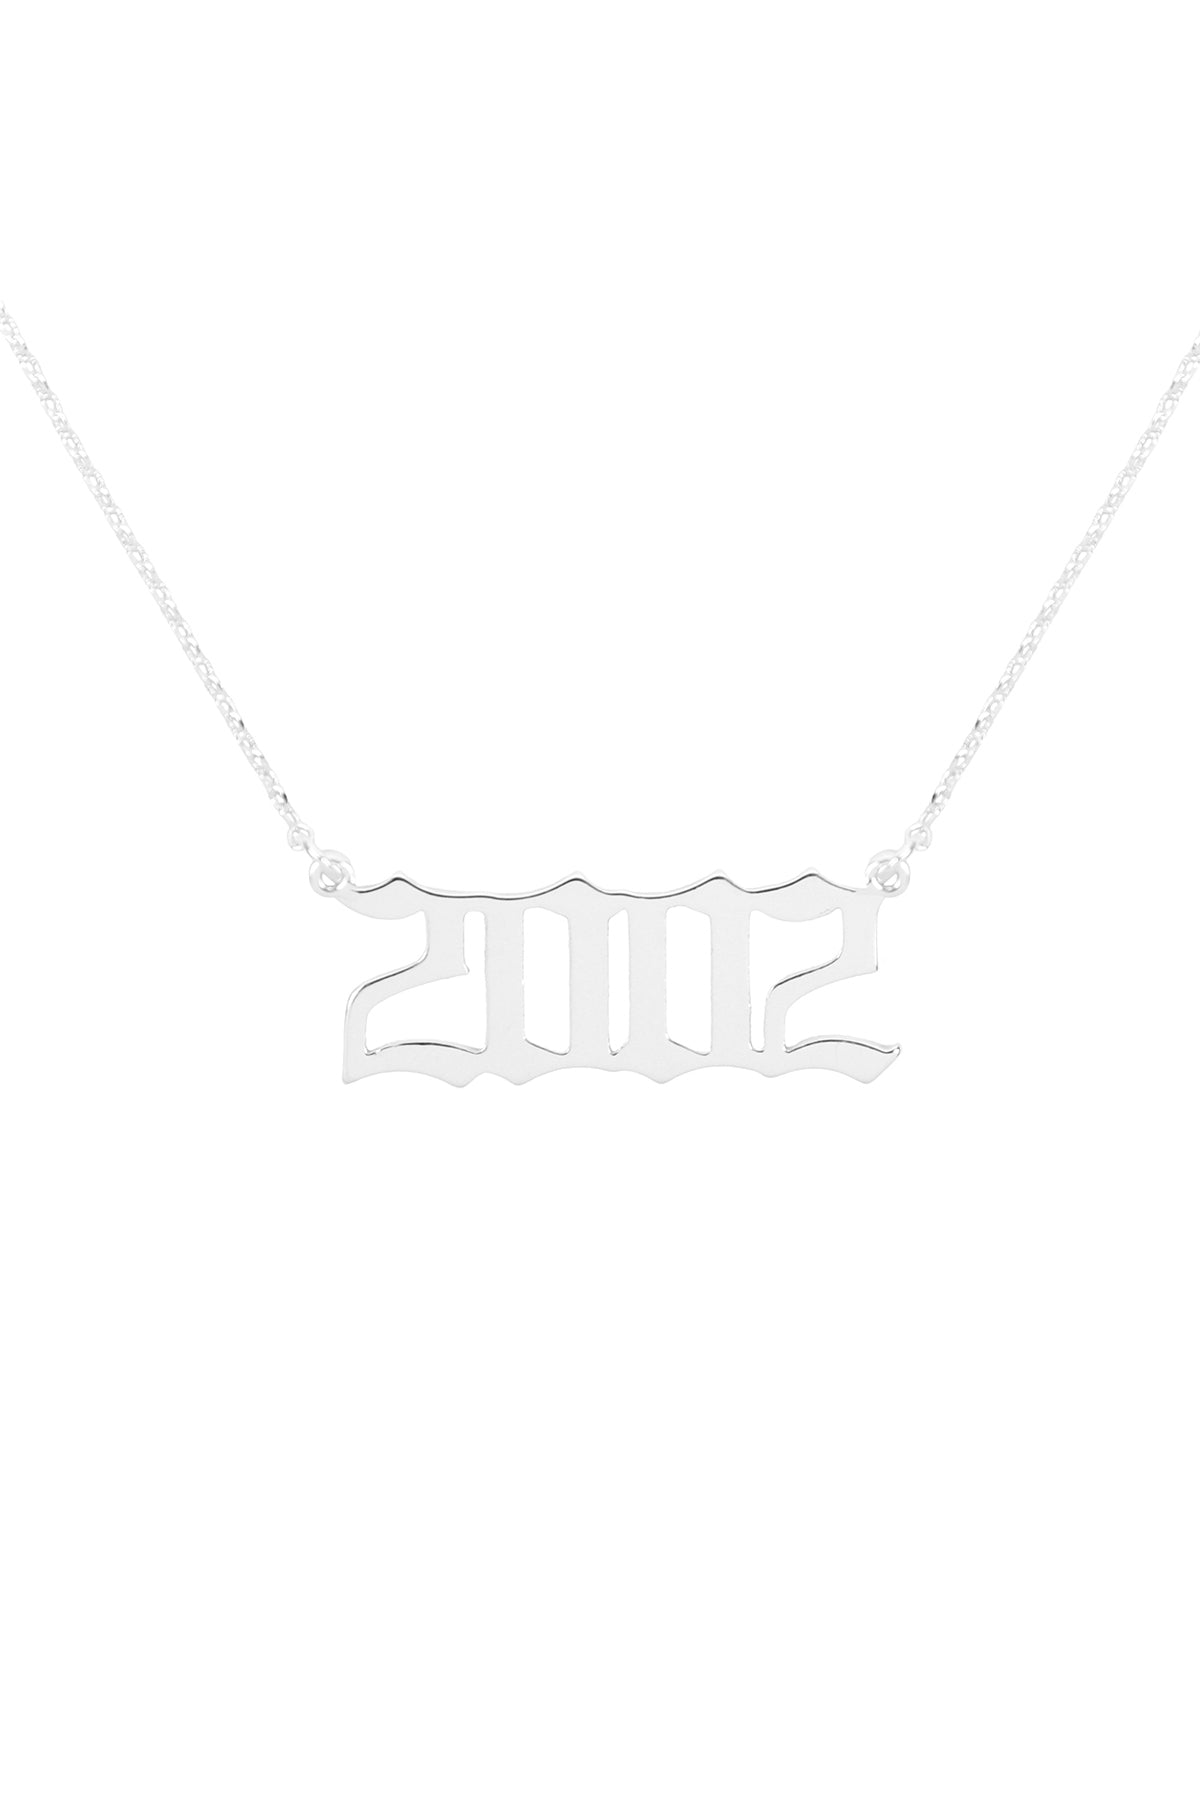 "2002" BIRTH YEAR PERSONALIZED NECKLACE